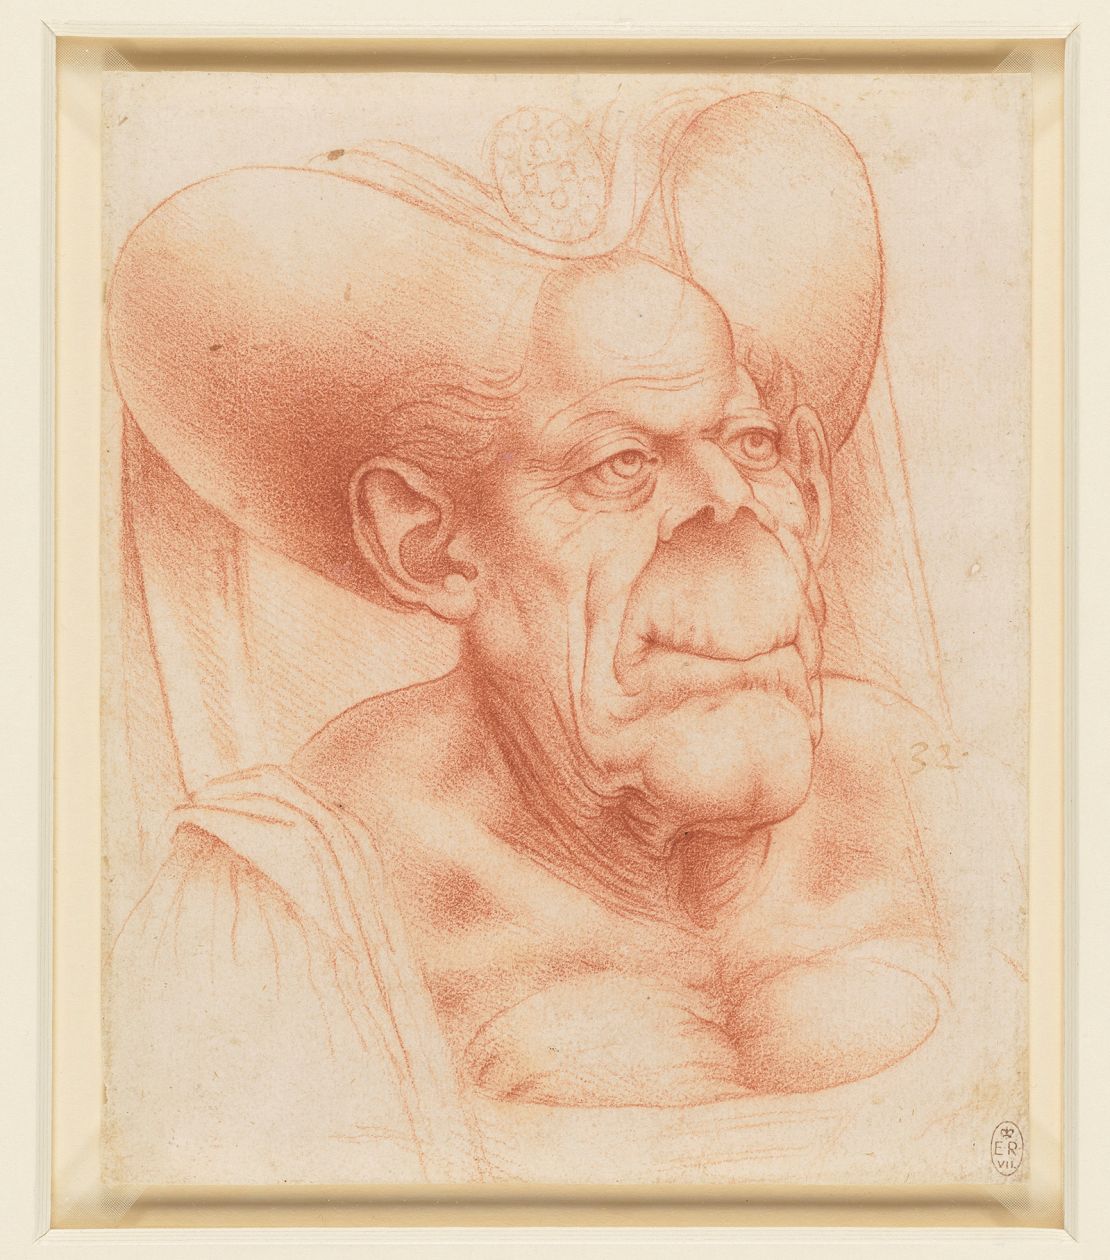 "The bust of a grotesque old woman. " Attributed to Francesco Melzi, Leonardo da Vinci's leading assistant, who historians believe created a copy from Leornardo's original work. (1510-20).